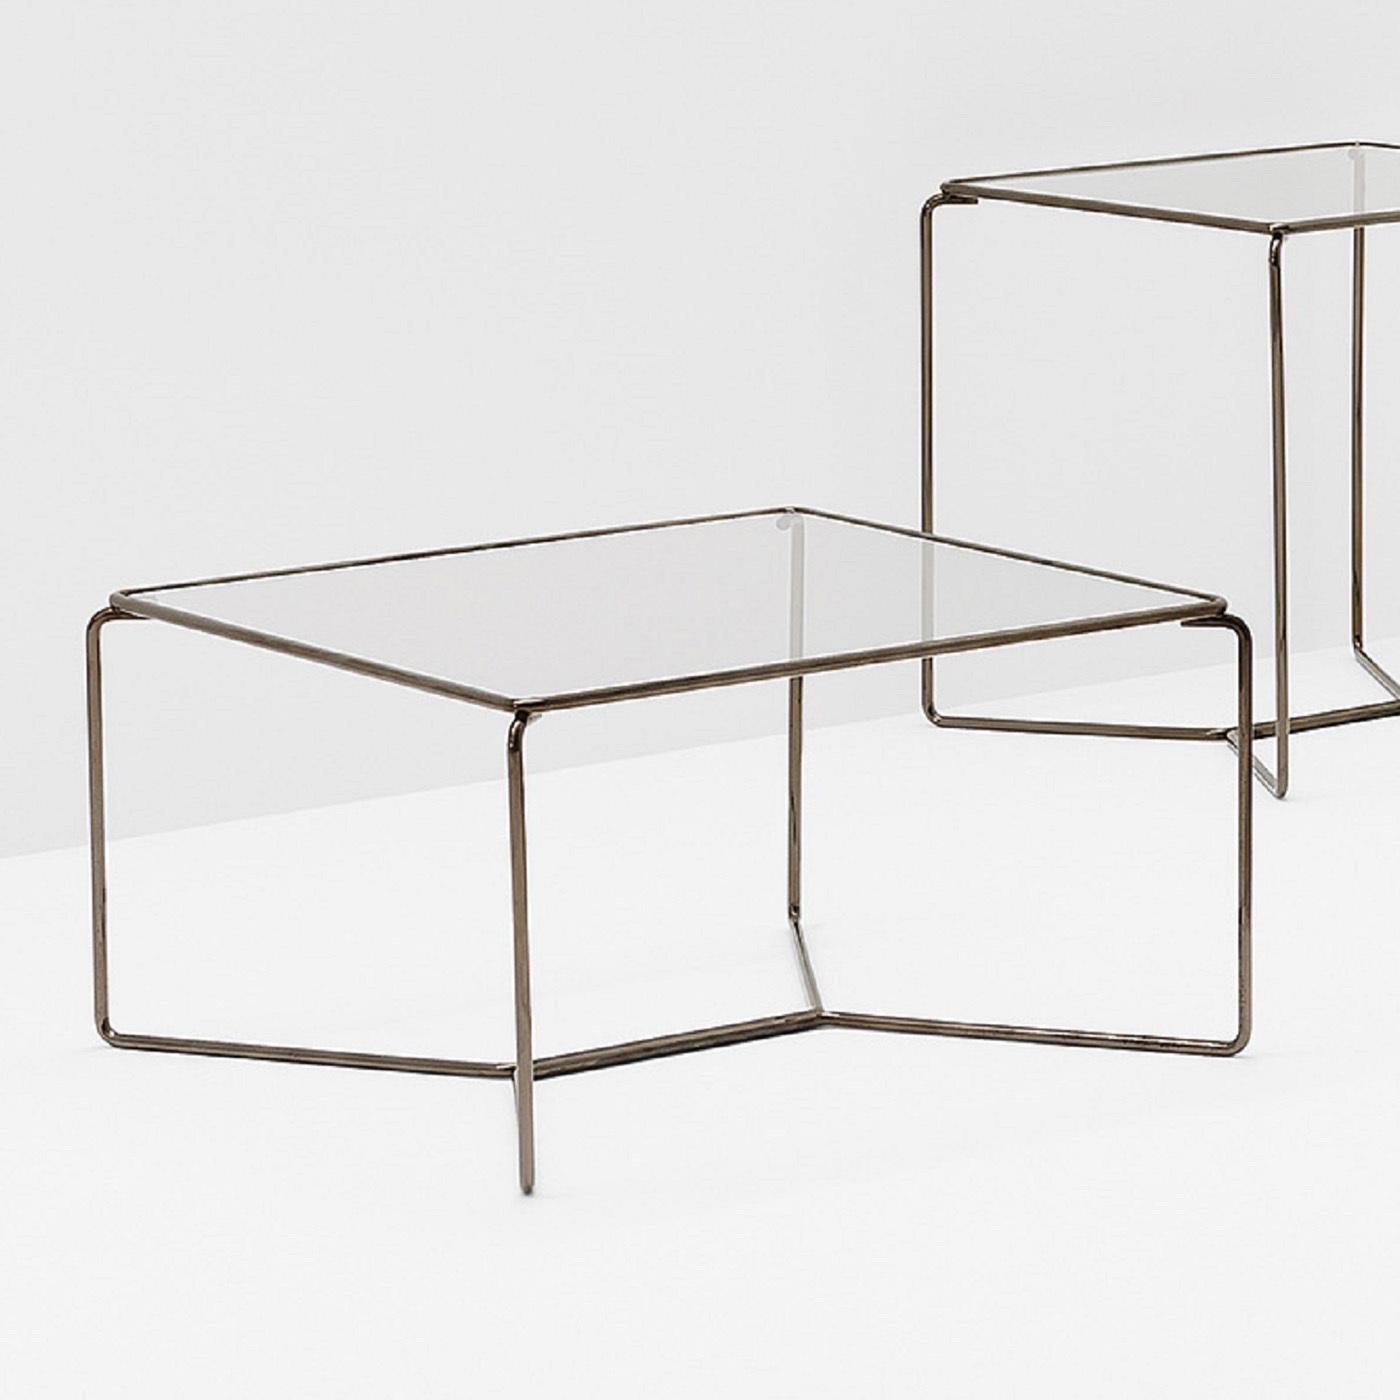 With a clean minimalist design, the superb Marcel Coffee Table is a stylish revisitation of a last century classic. Available in carbon steel with an extra clear glass top.